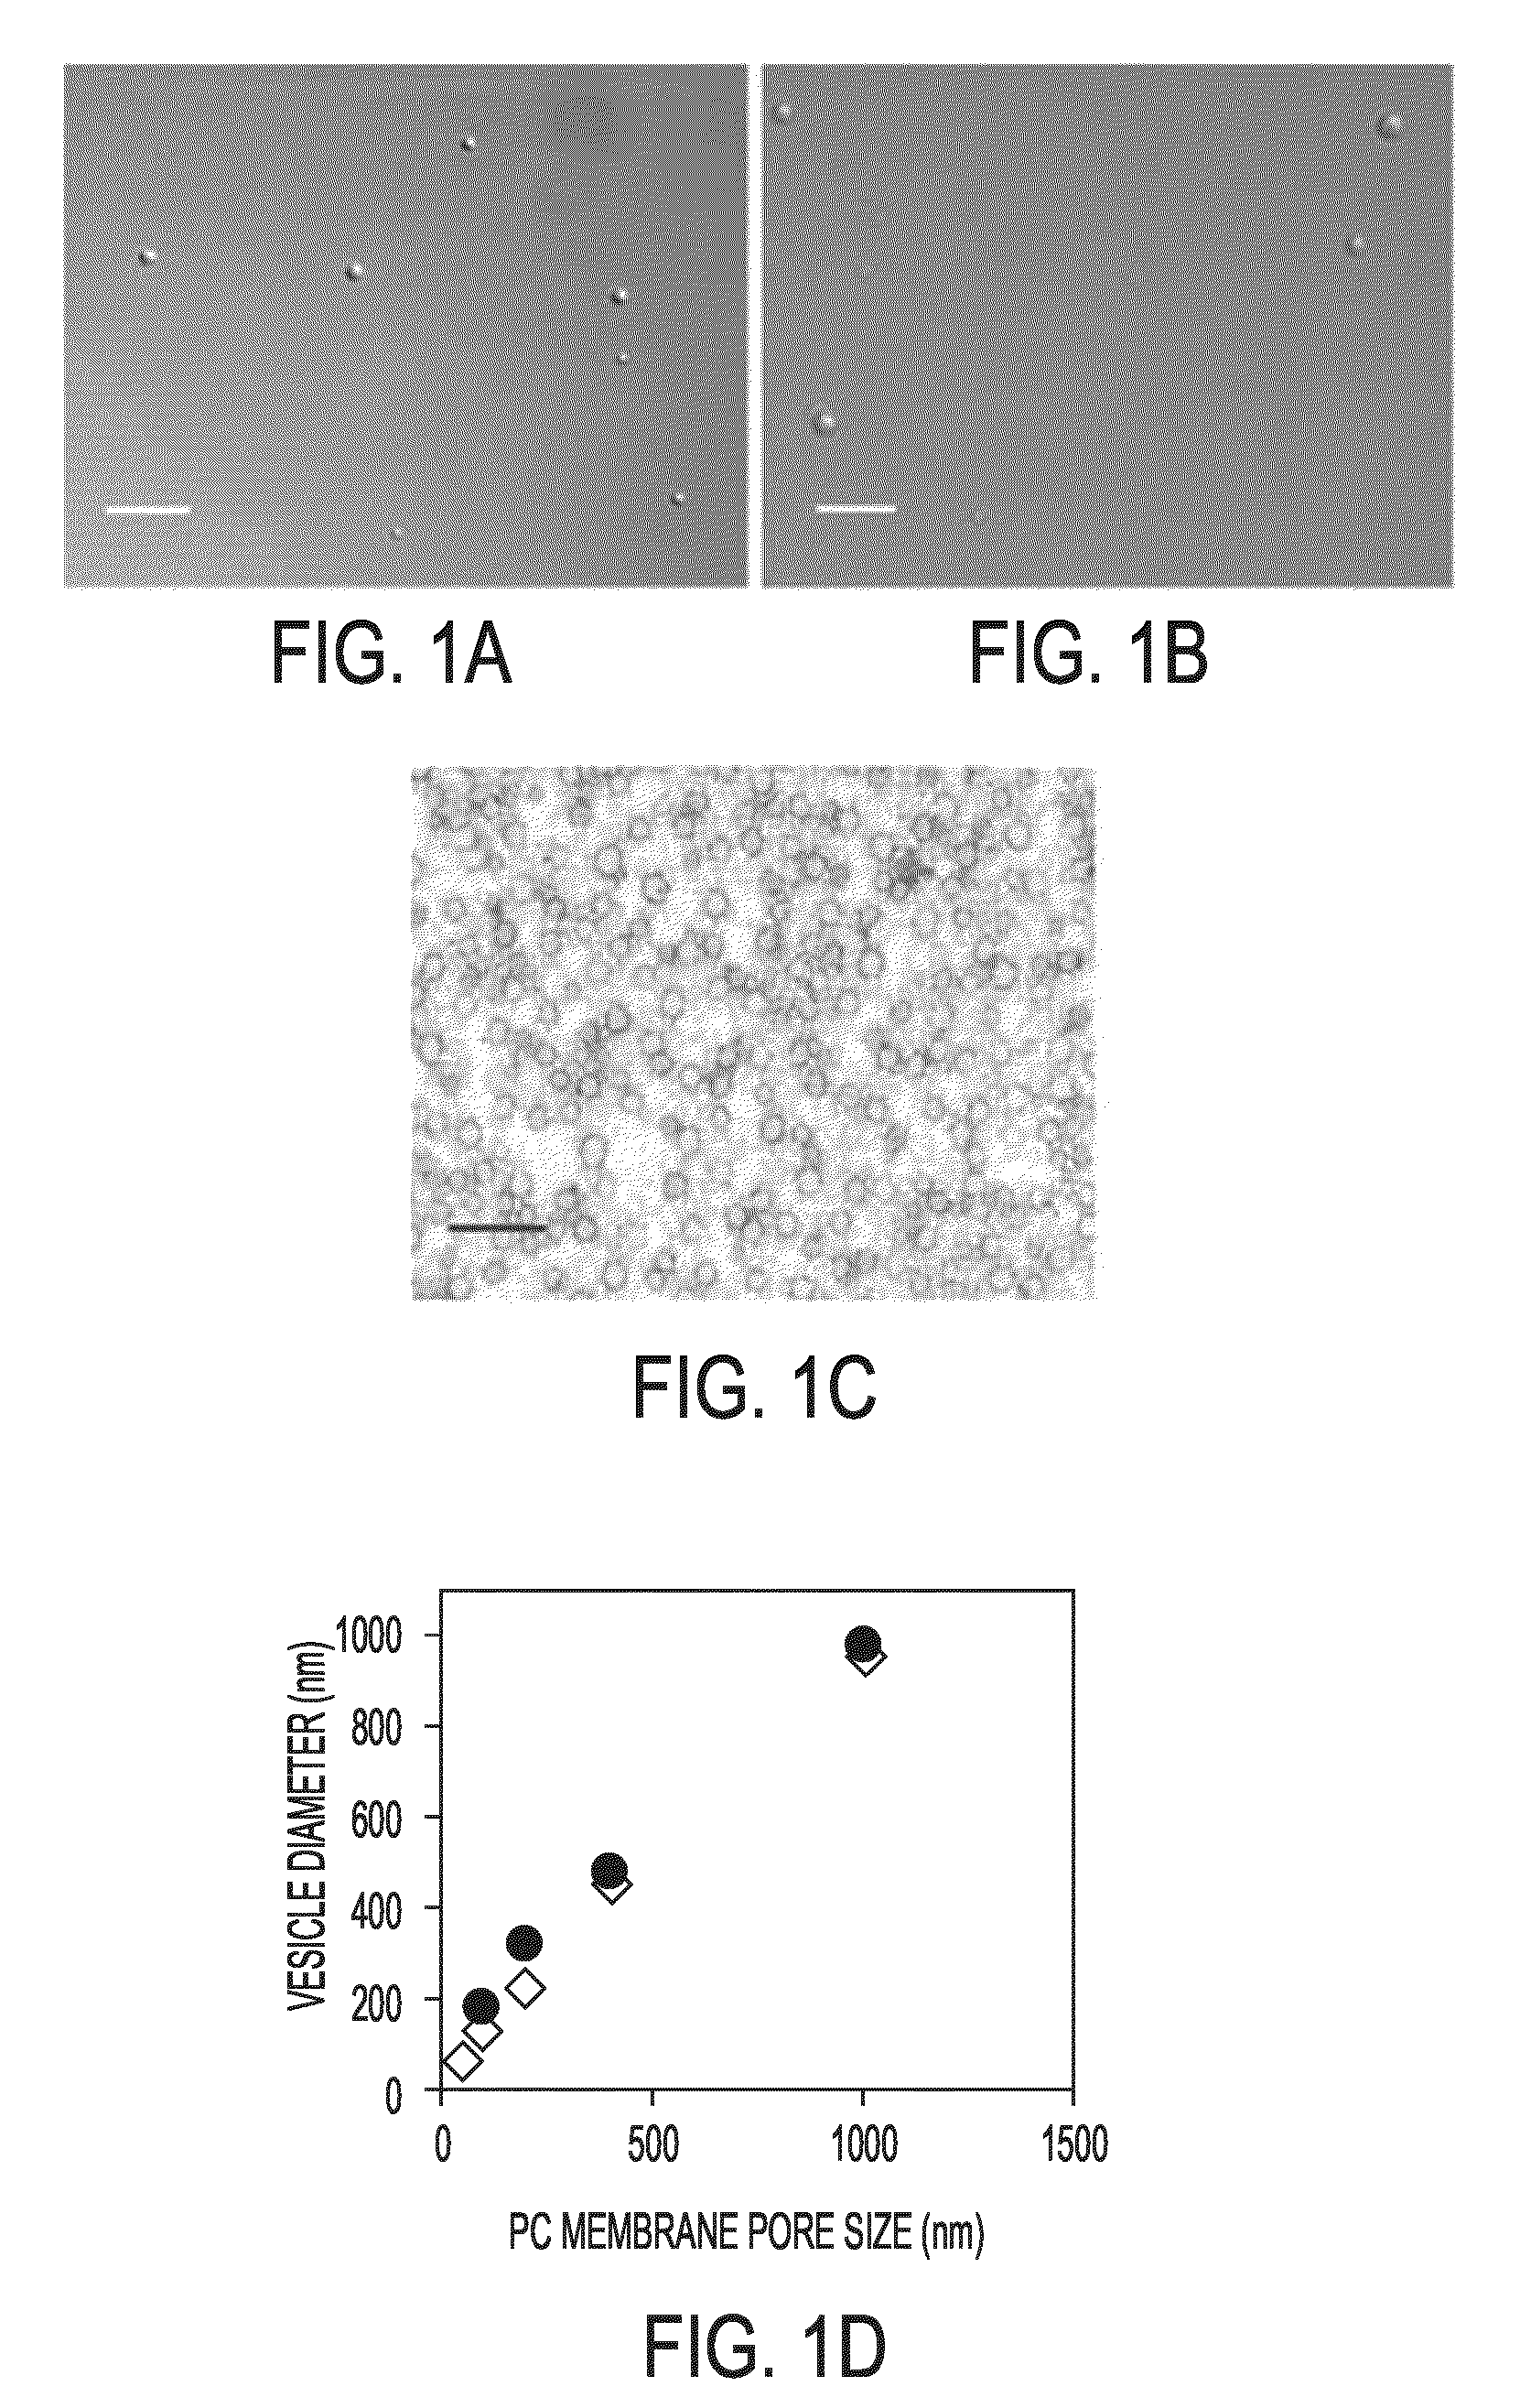 Copolymer-stabilized emulsions